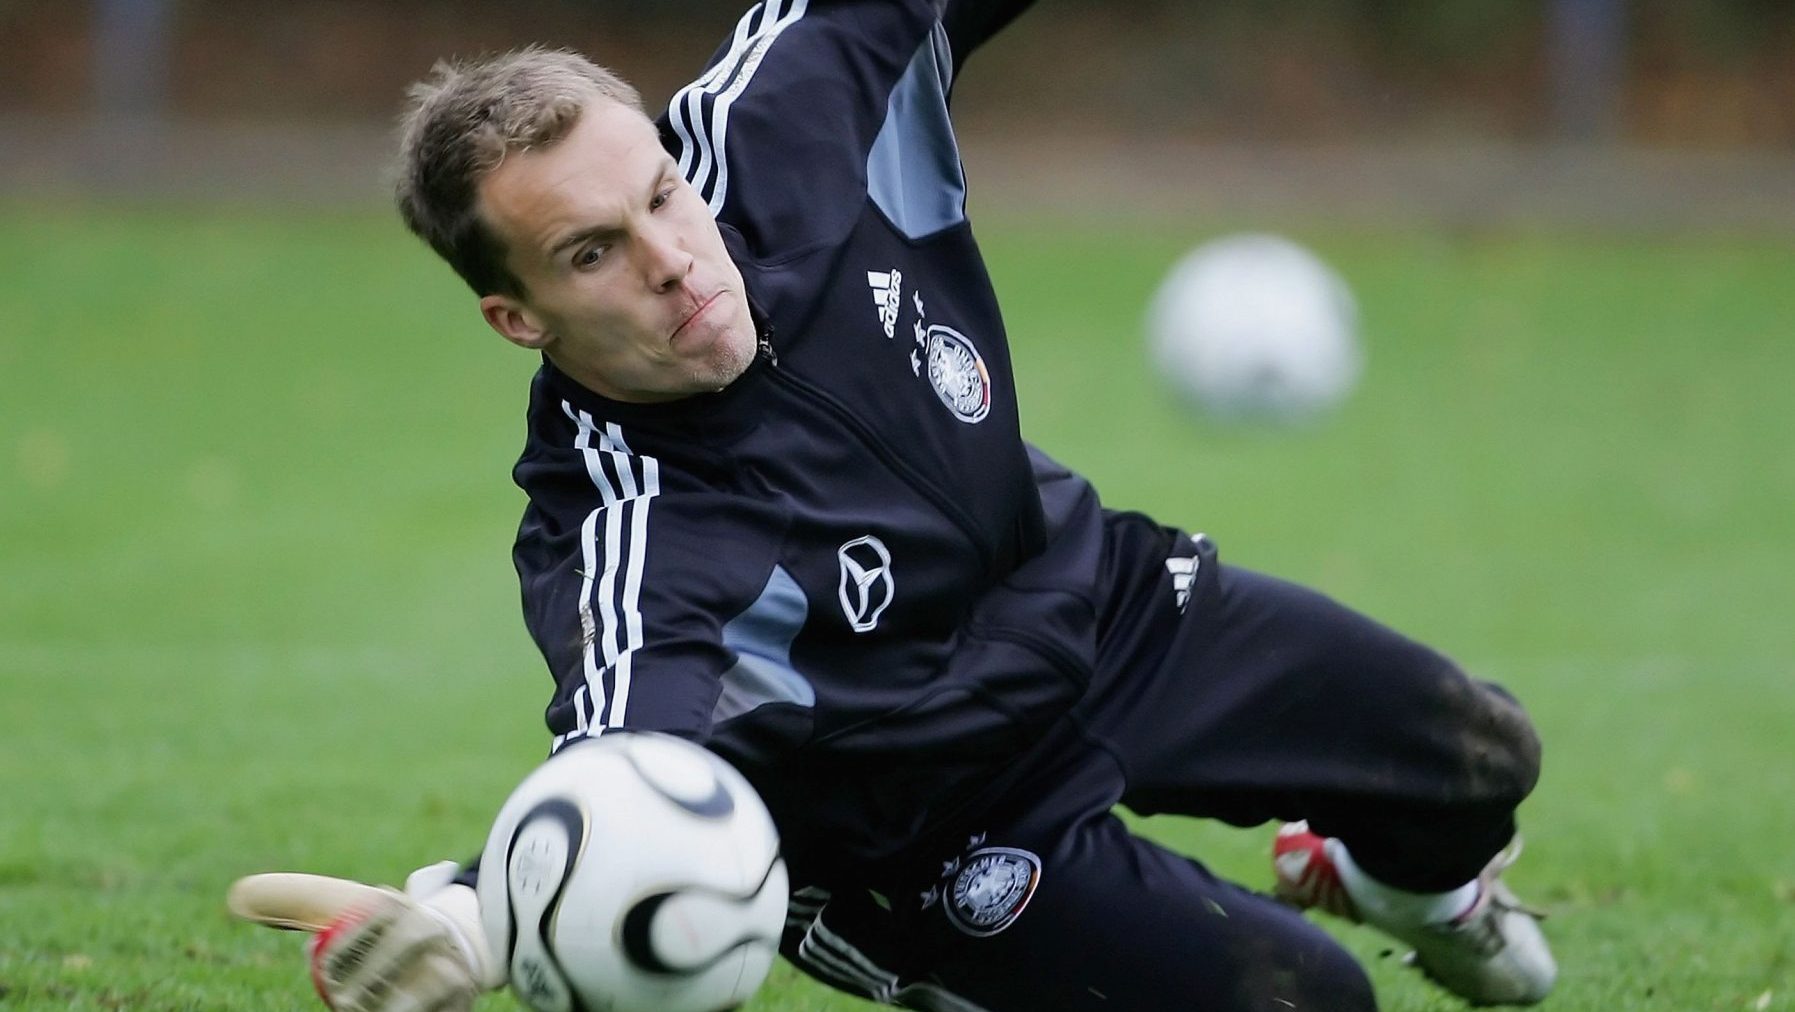 Former German national goalkeeper Robert Enke during a training session in 2006. Three years later he took his own life at the age of 32. Photo: Stuart Franklin/Bongarts/Getty